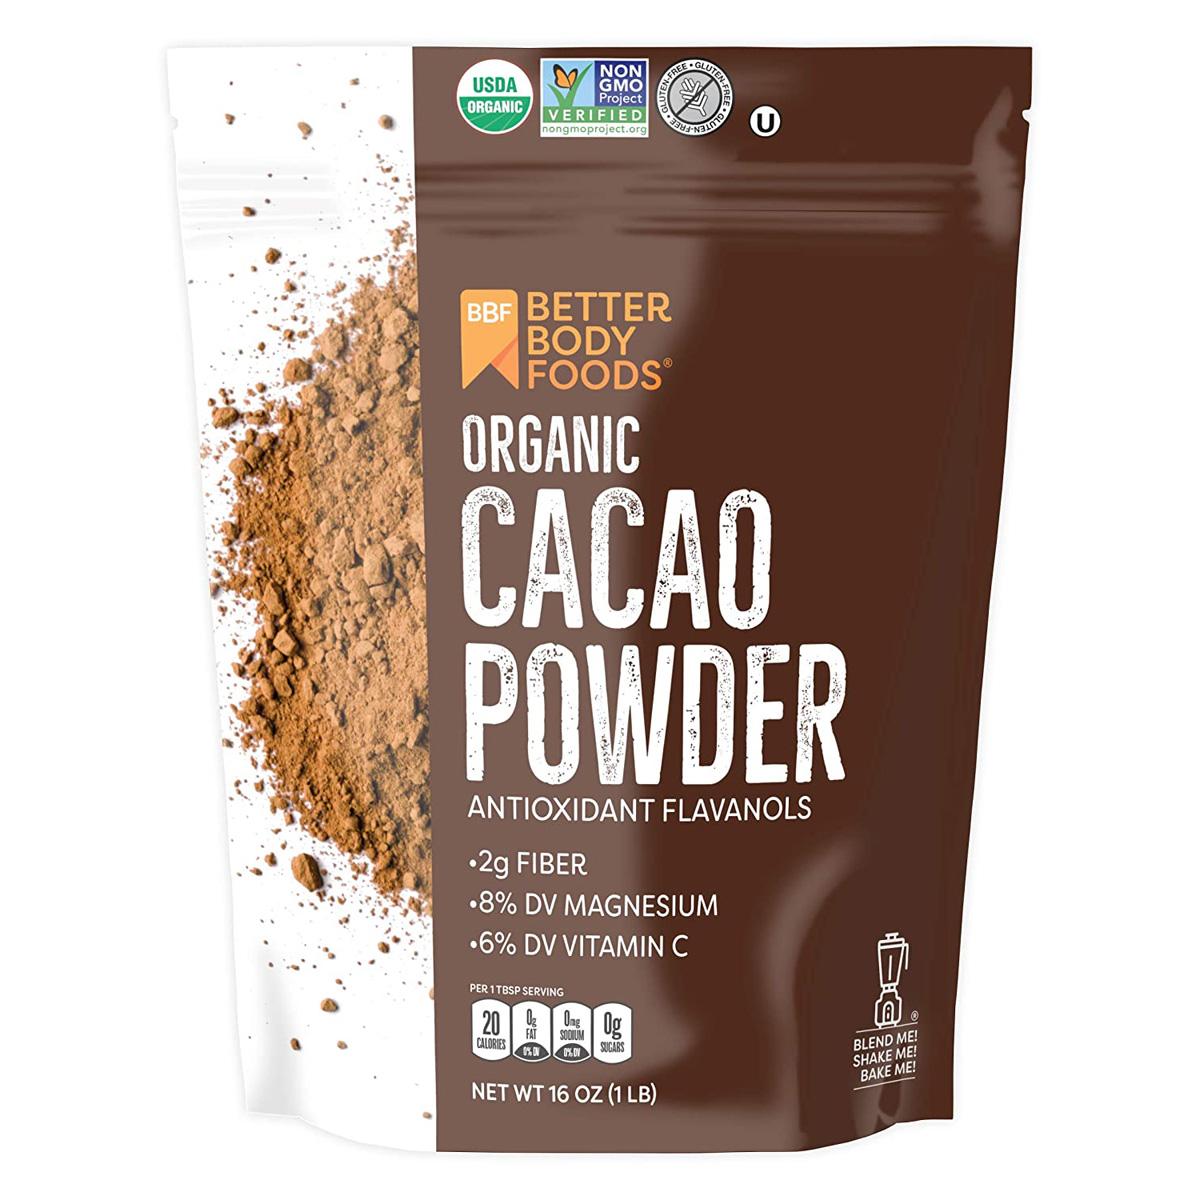 2Lbs BetterBody Foods Organic Cacao Powder for $11.88 Shipped